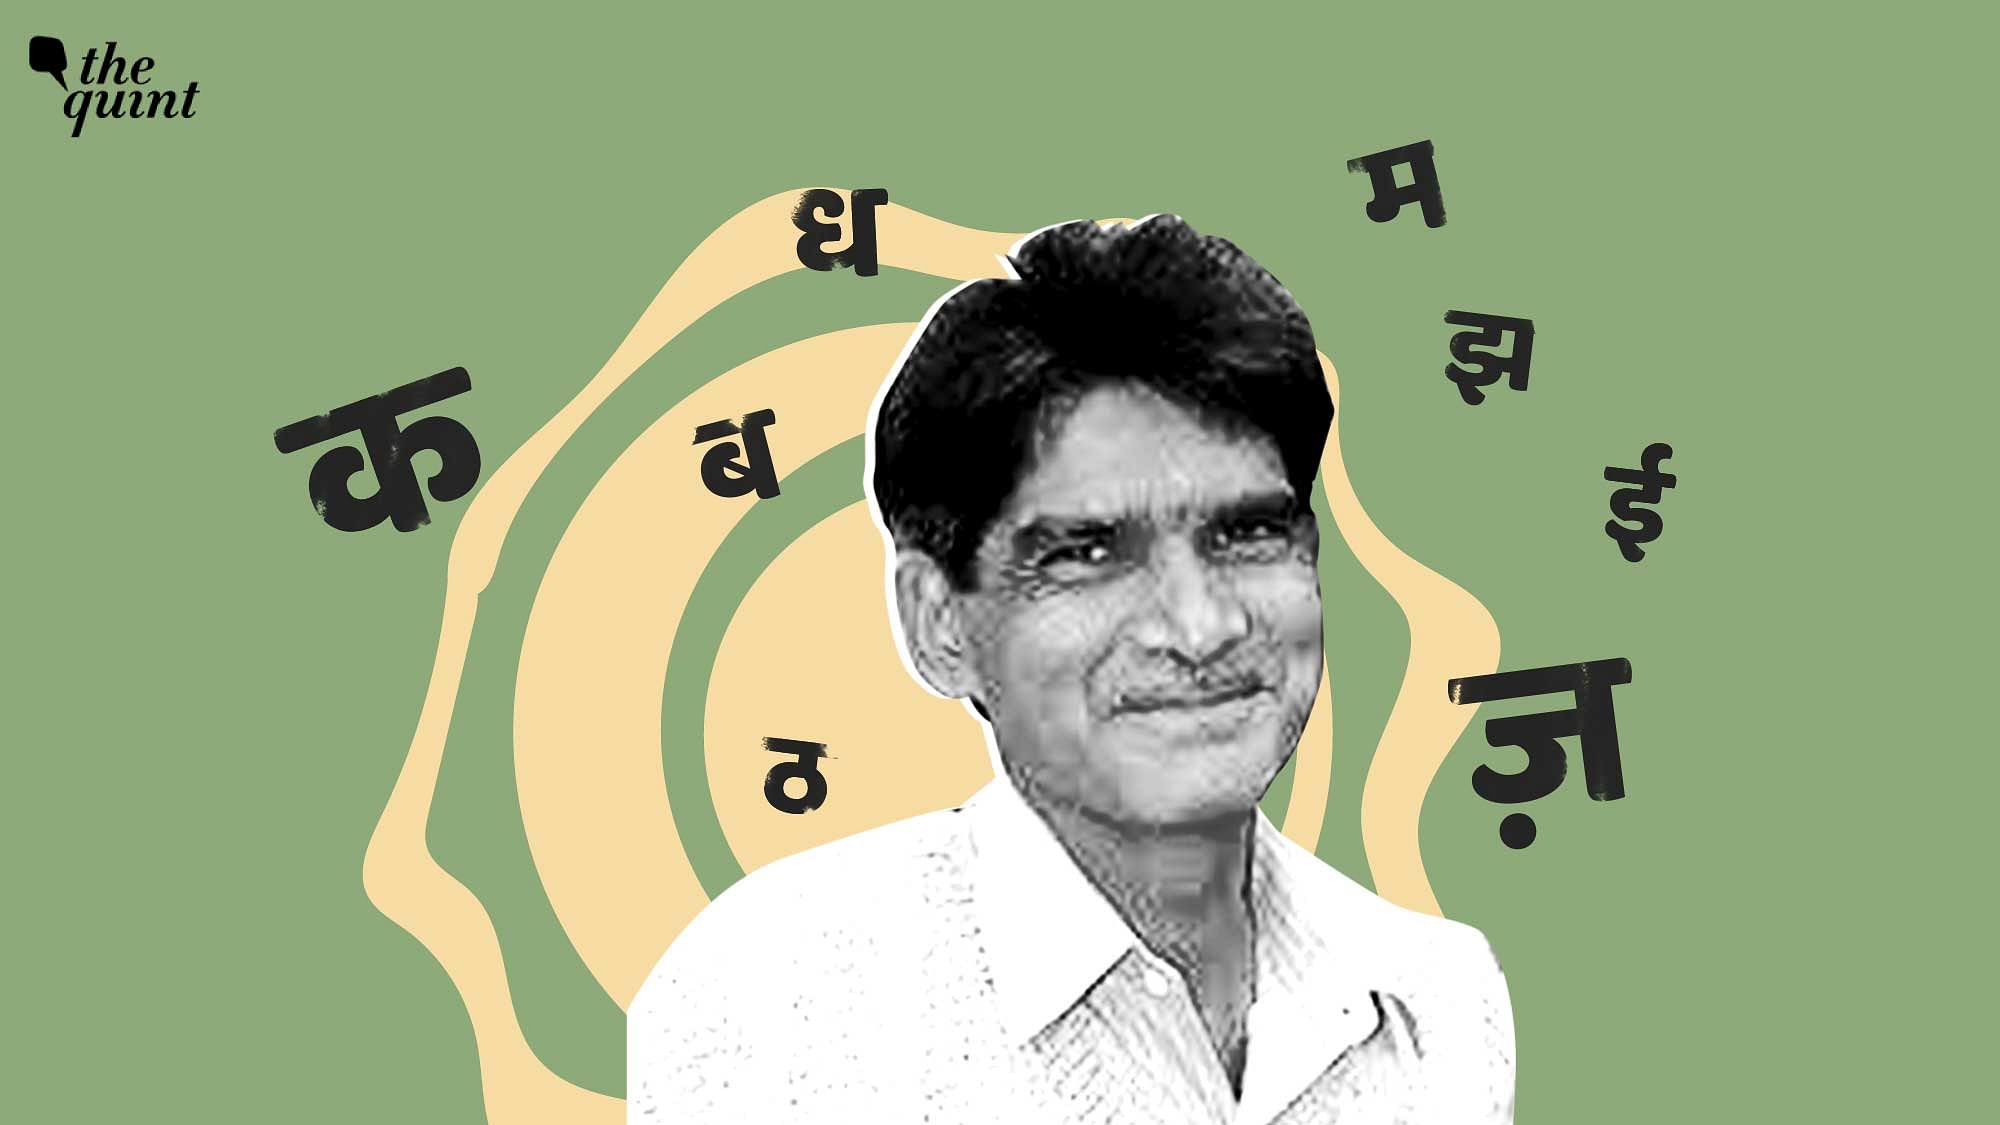 In this special episode on Hindi Diwas, we are trying to understand the famous divide between ‘Hindustani’ languages – Hindi and Urdu.